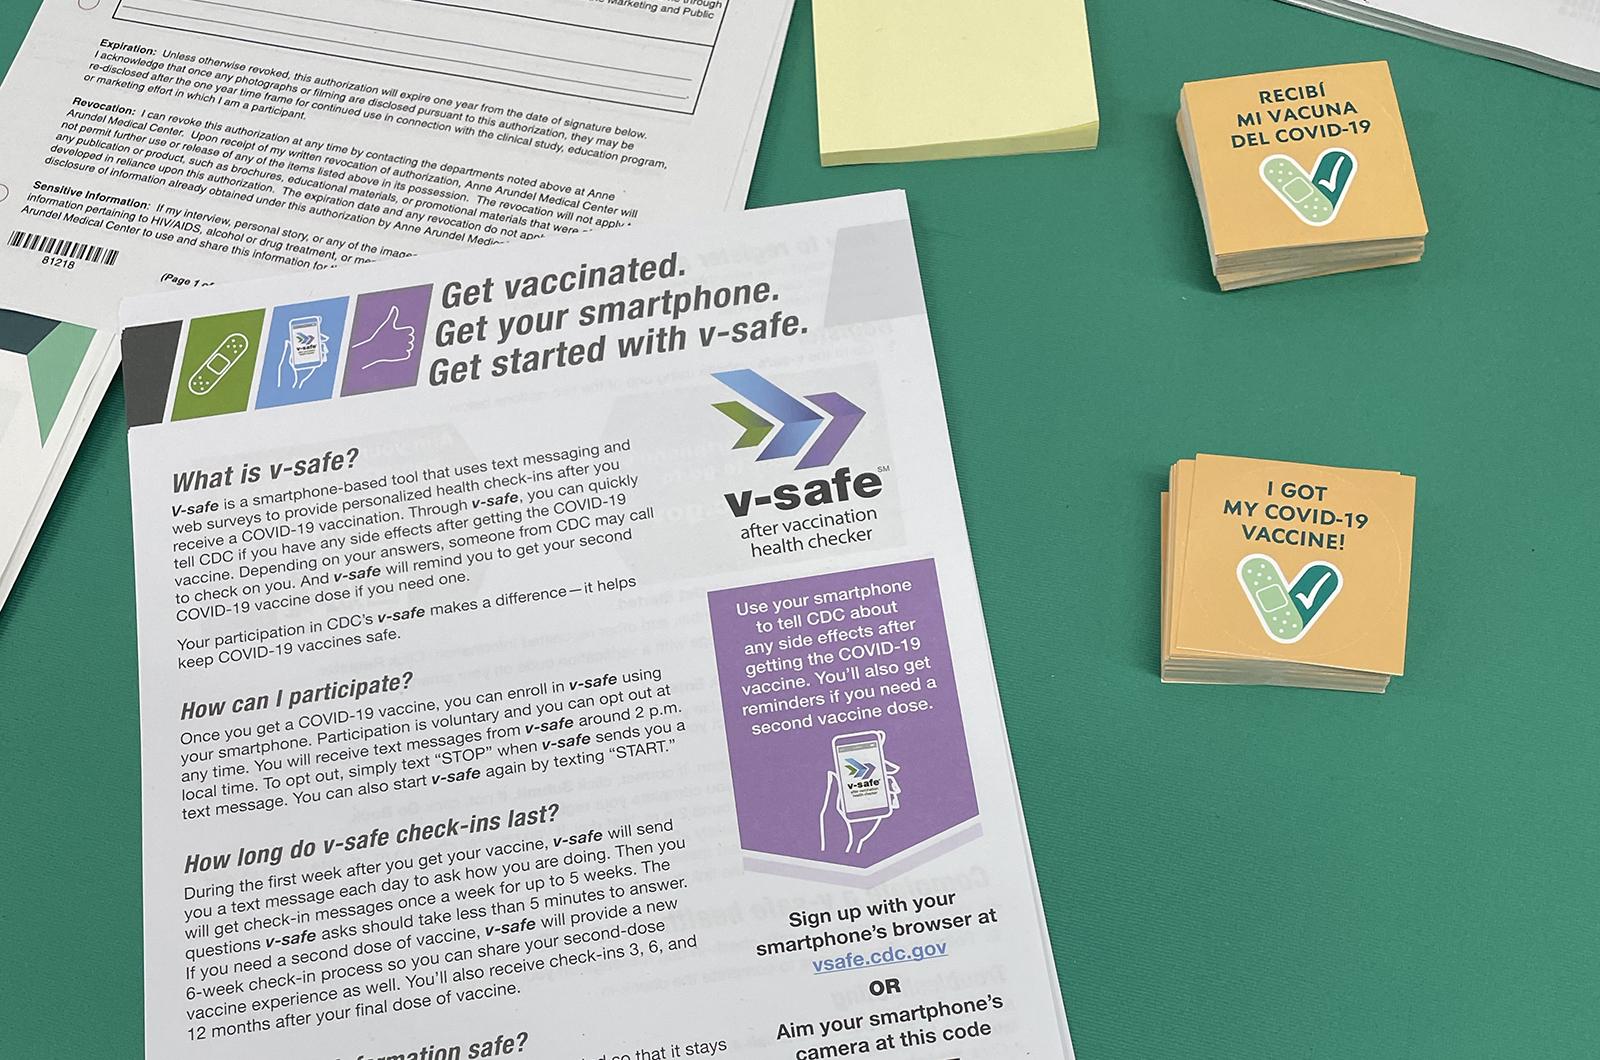 Literature on a table at the barbershop clinic shows how to sign up for the CDC's safe vaccine symptom tracking system.